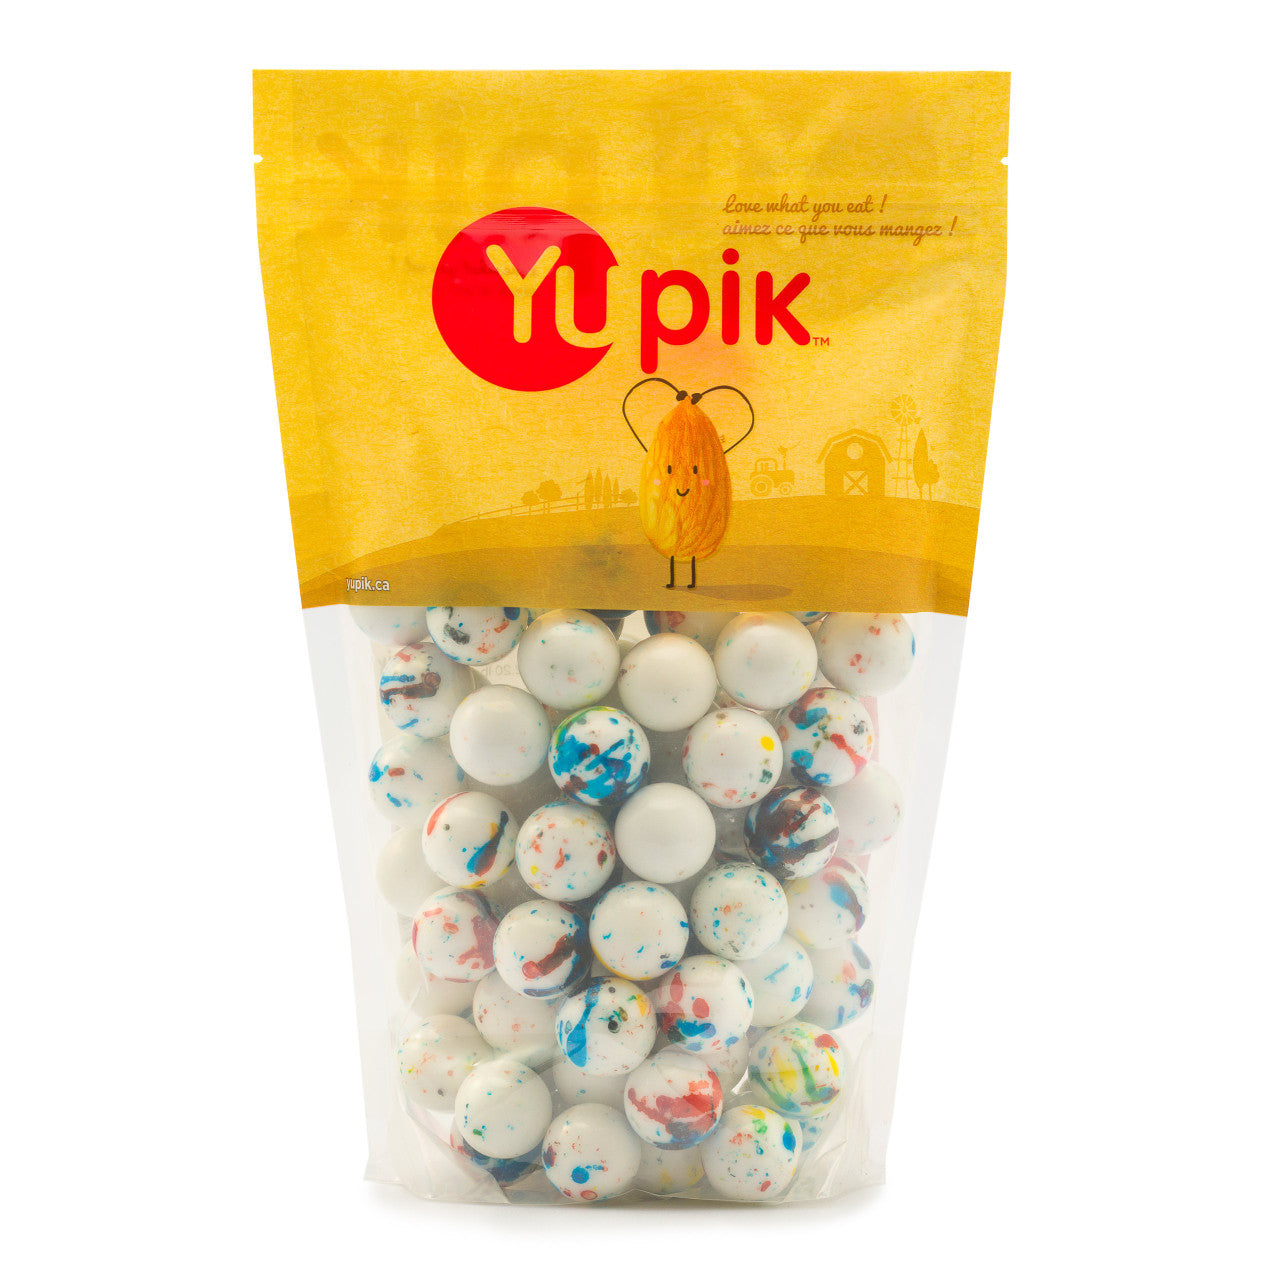 Yupik Psychedelic Jaw Breaker, 1kg/2.2 lbs {Imported from Canada}